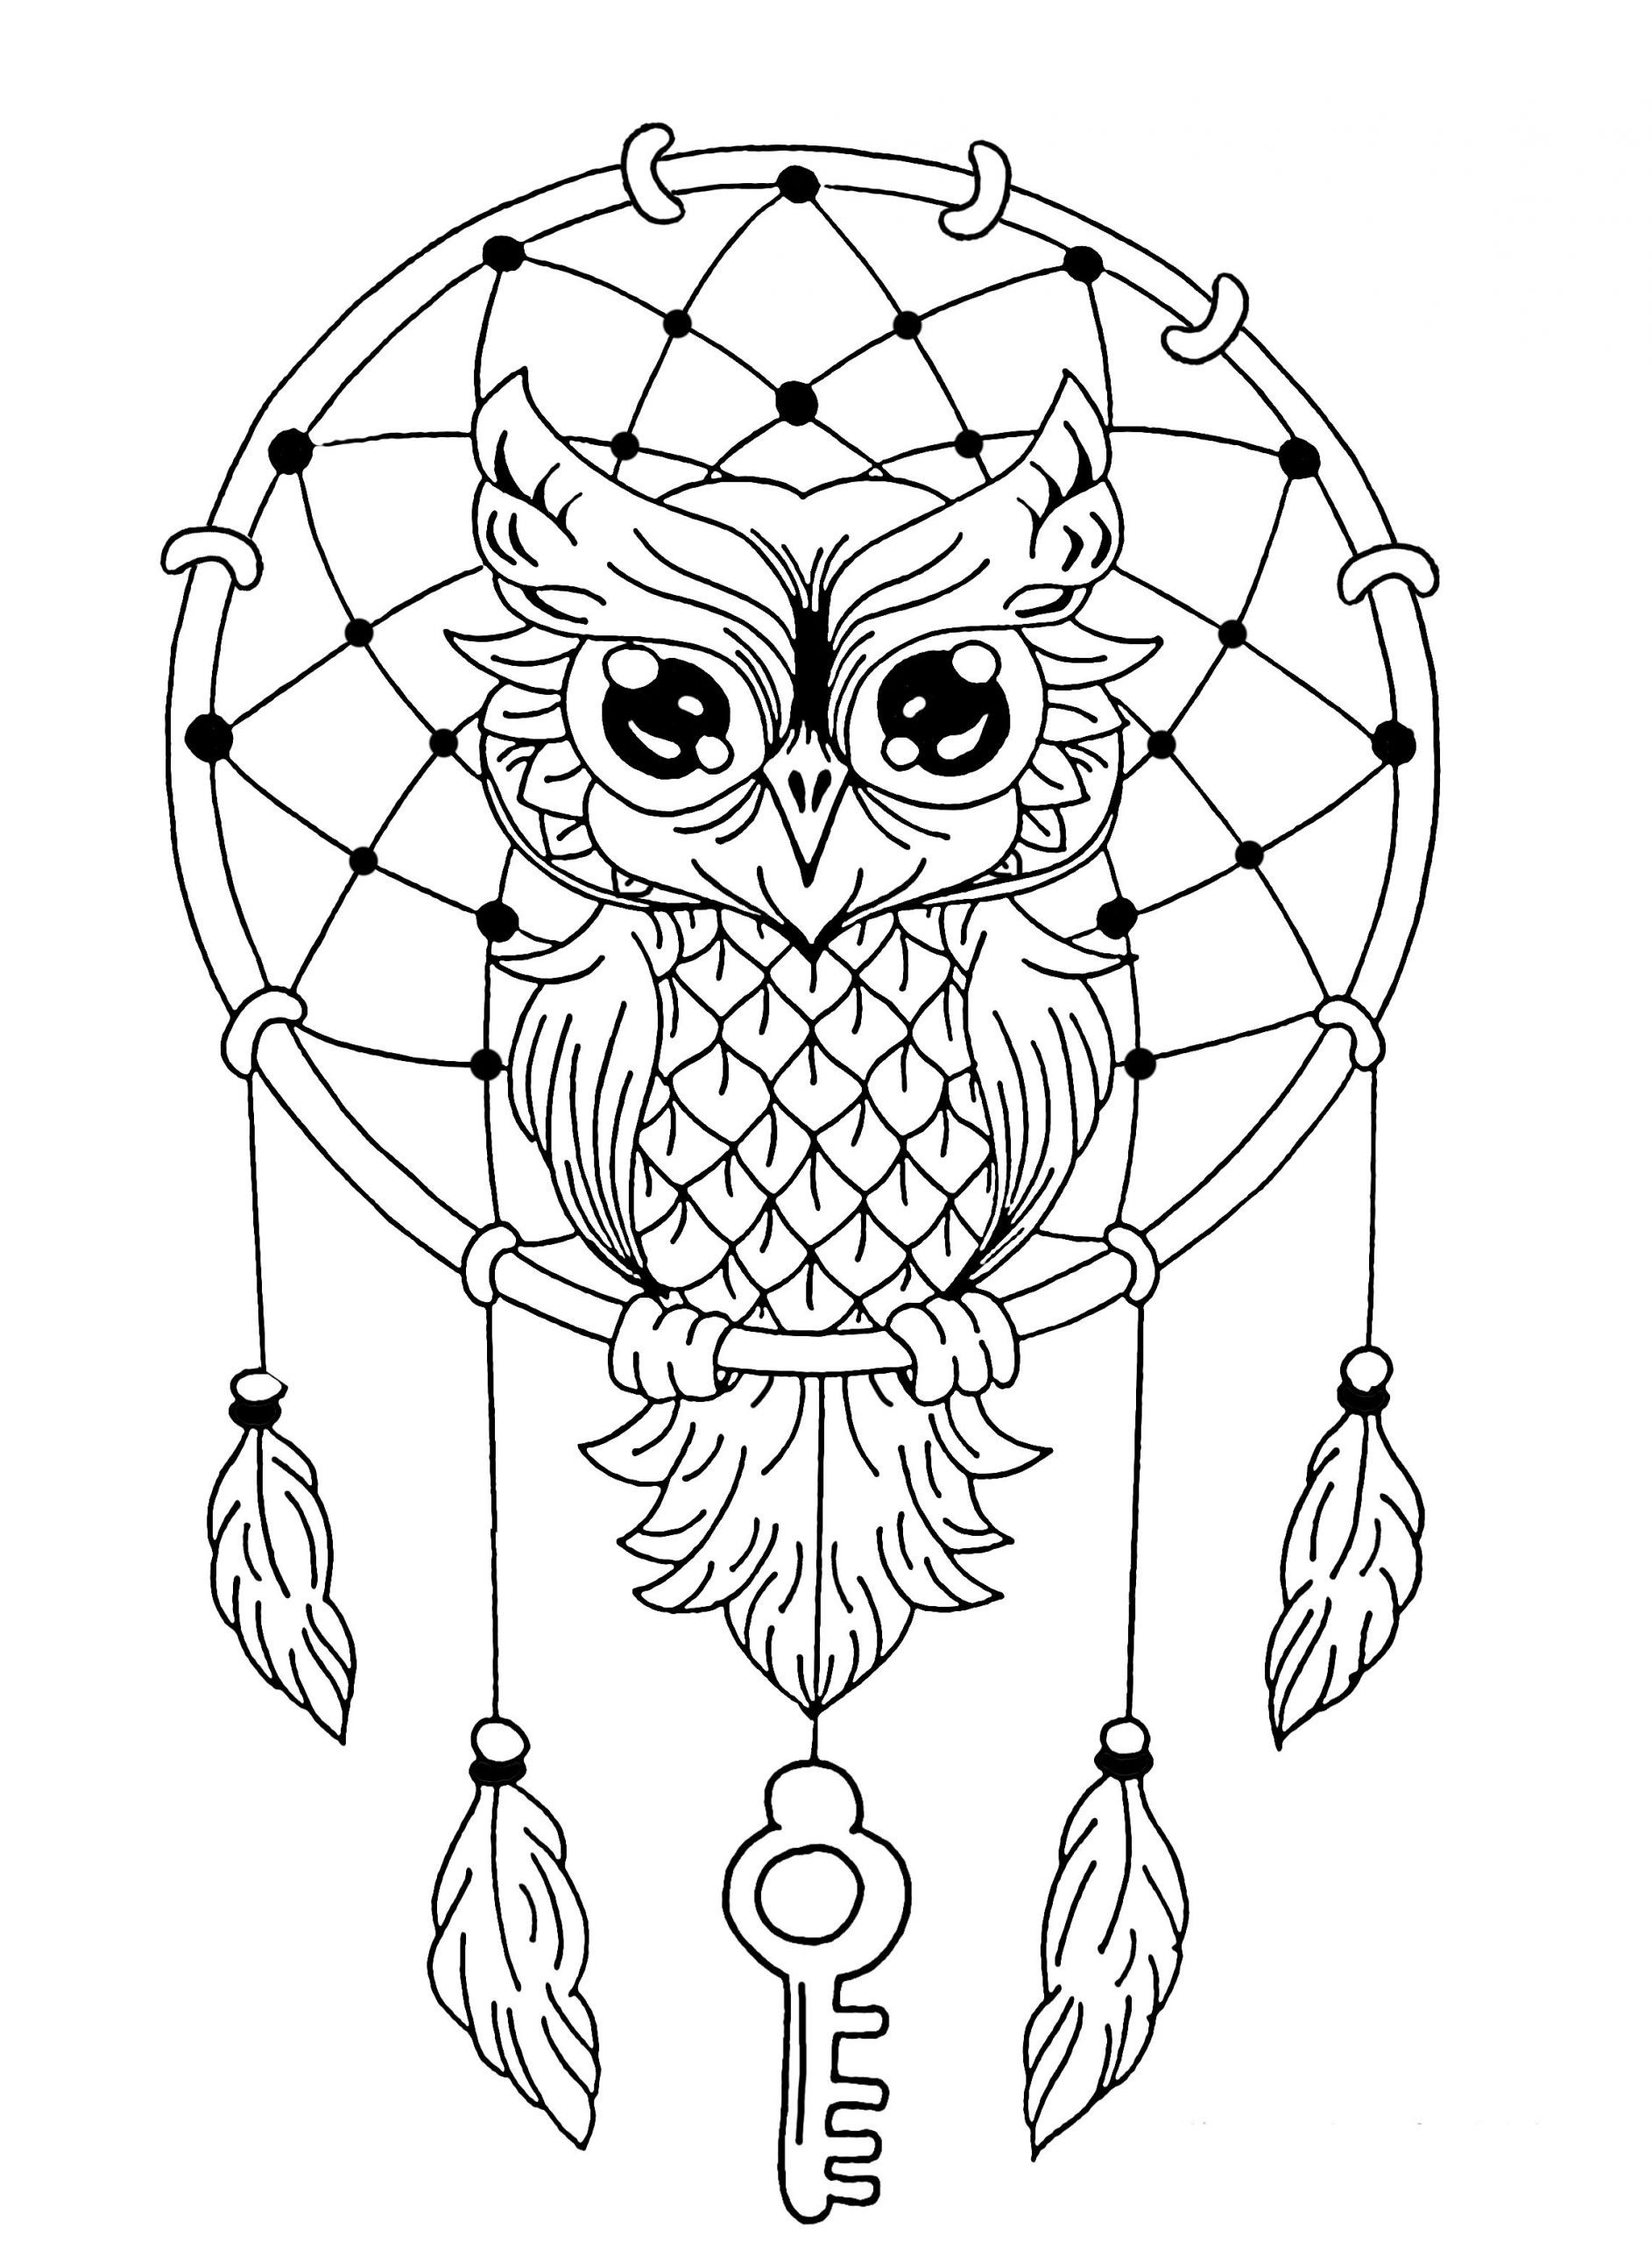 Owl Adult Coloring Pages
 Owl dreamcatcher Owls Adult Coloring Pages